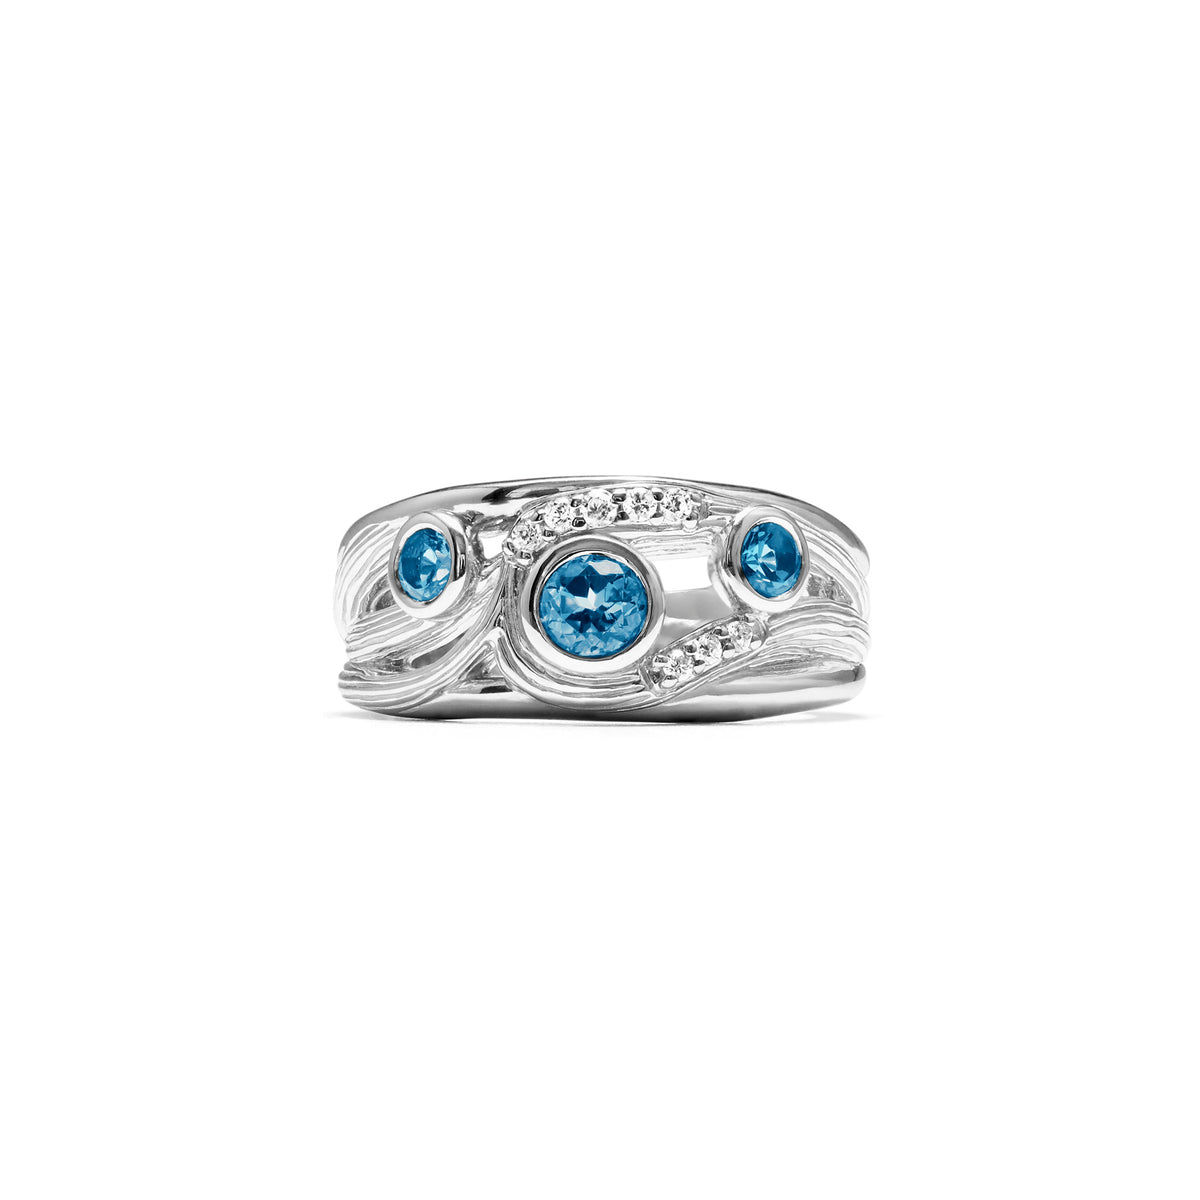 Santorini Band Ring with London Blue Topaz and Diamonds